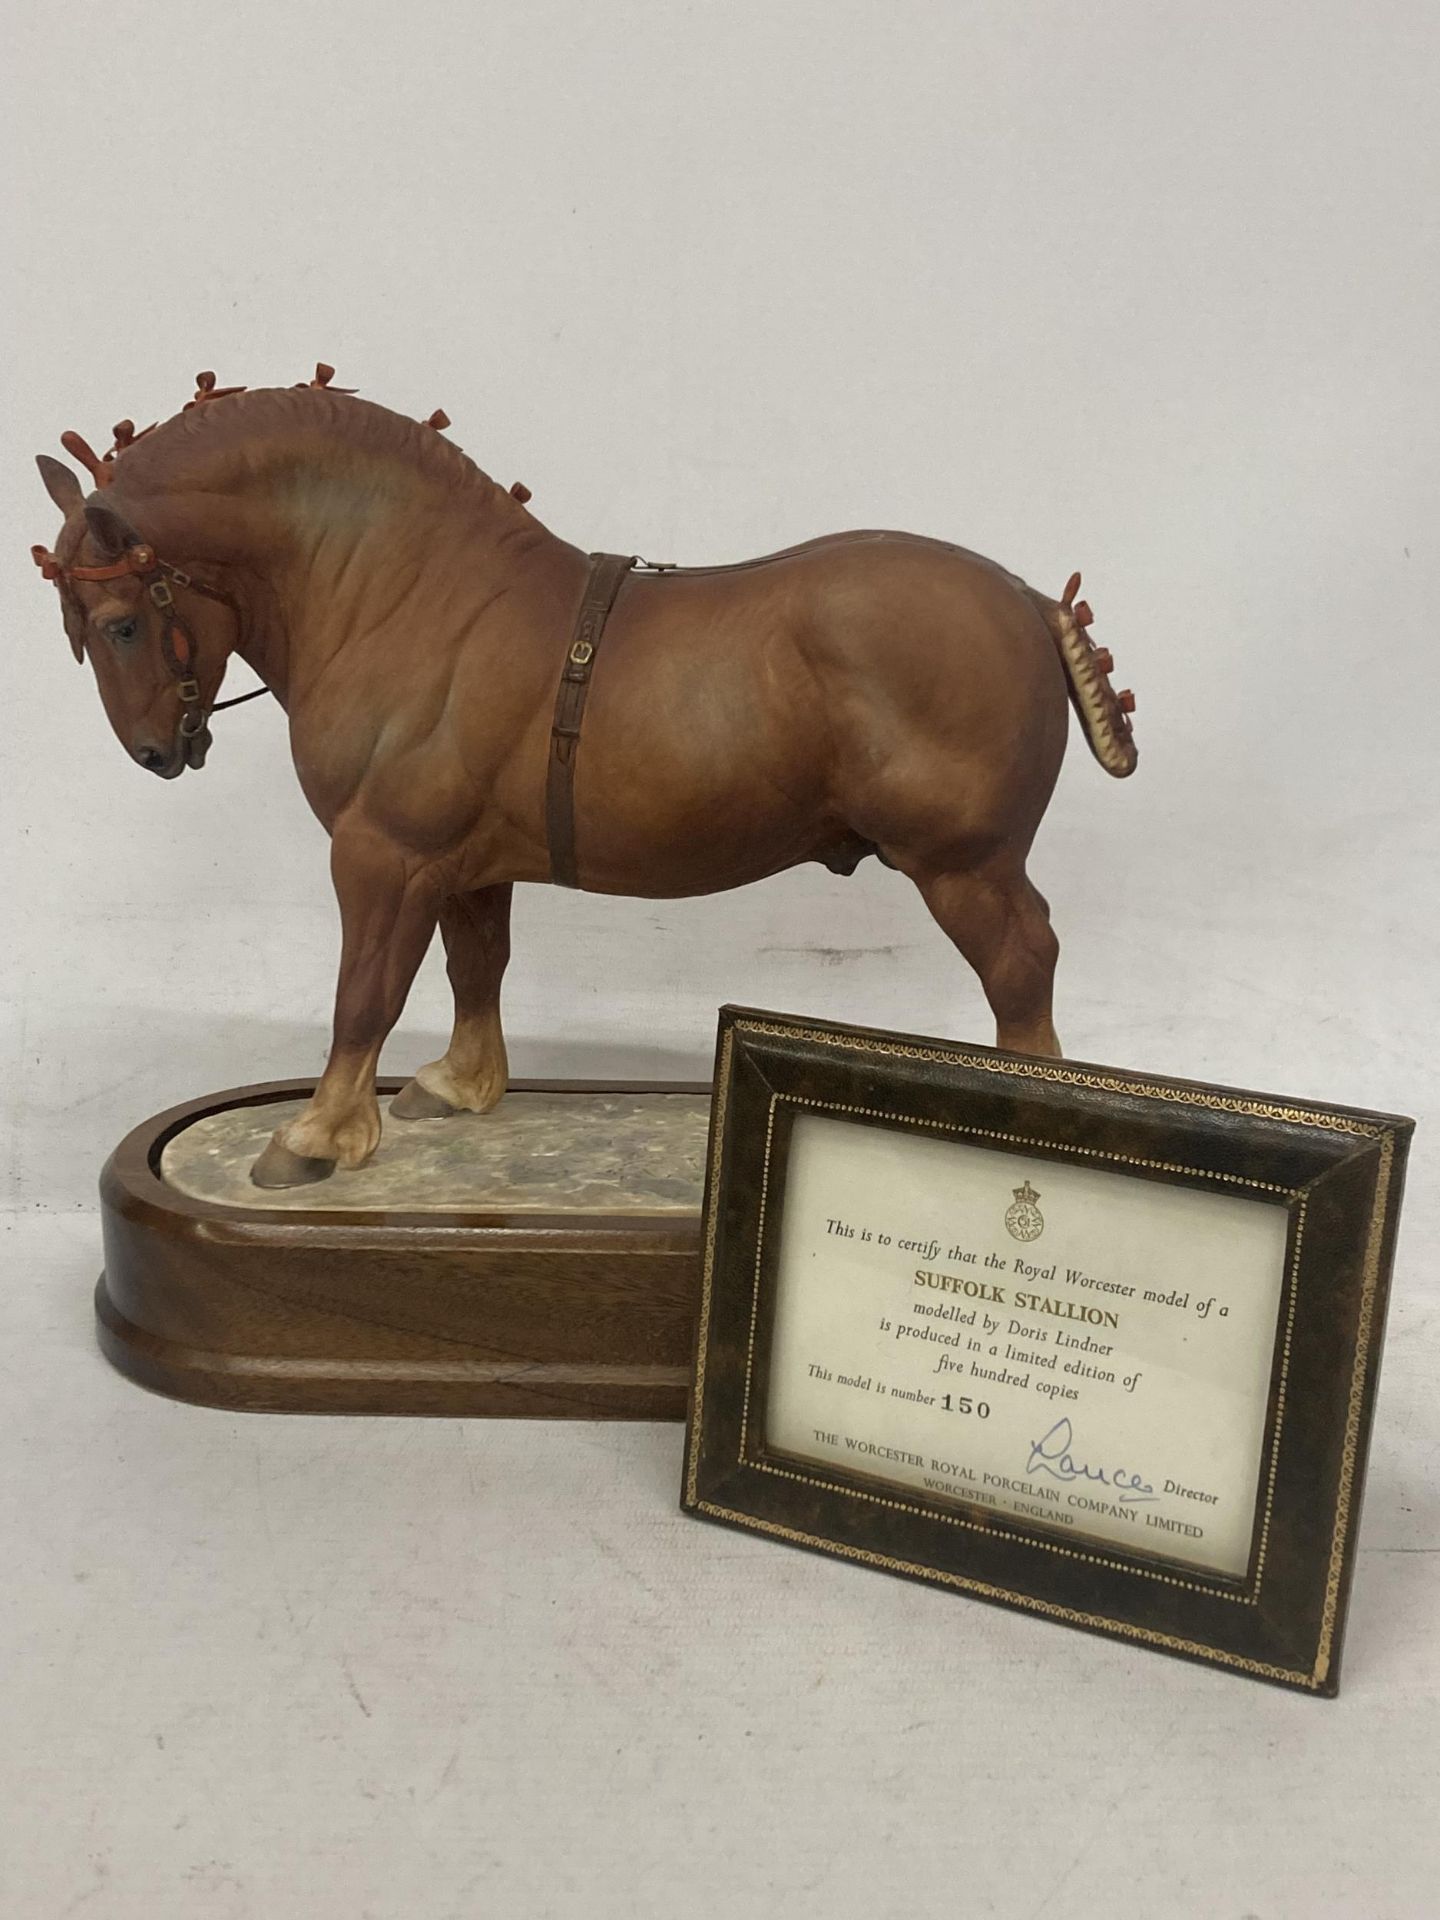 A ROYAL WORCESTER MODEL OF A SUFFOLK STALLION MODELLED BY DORIS LINDNER AND PRODUCED IN A LIMITED